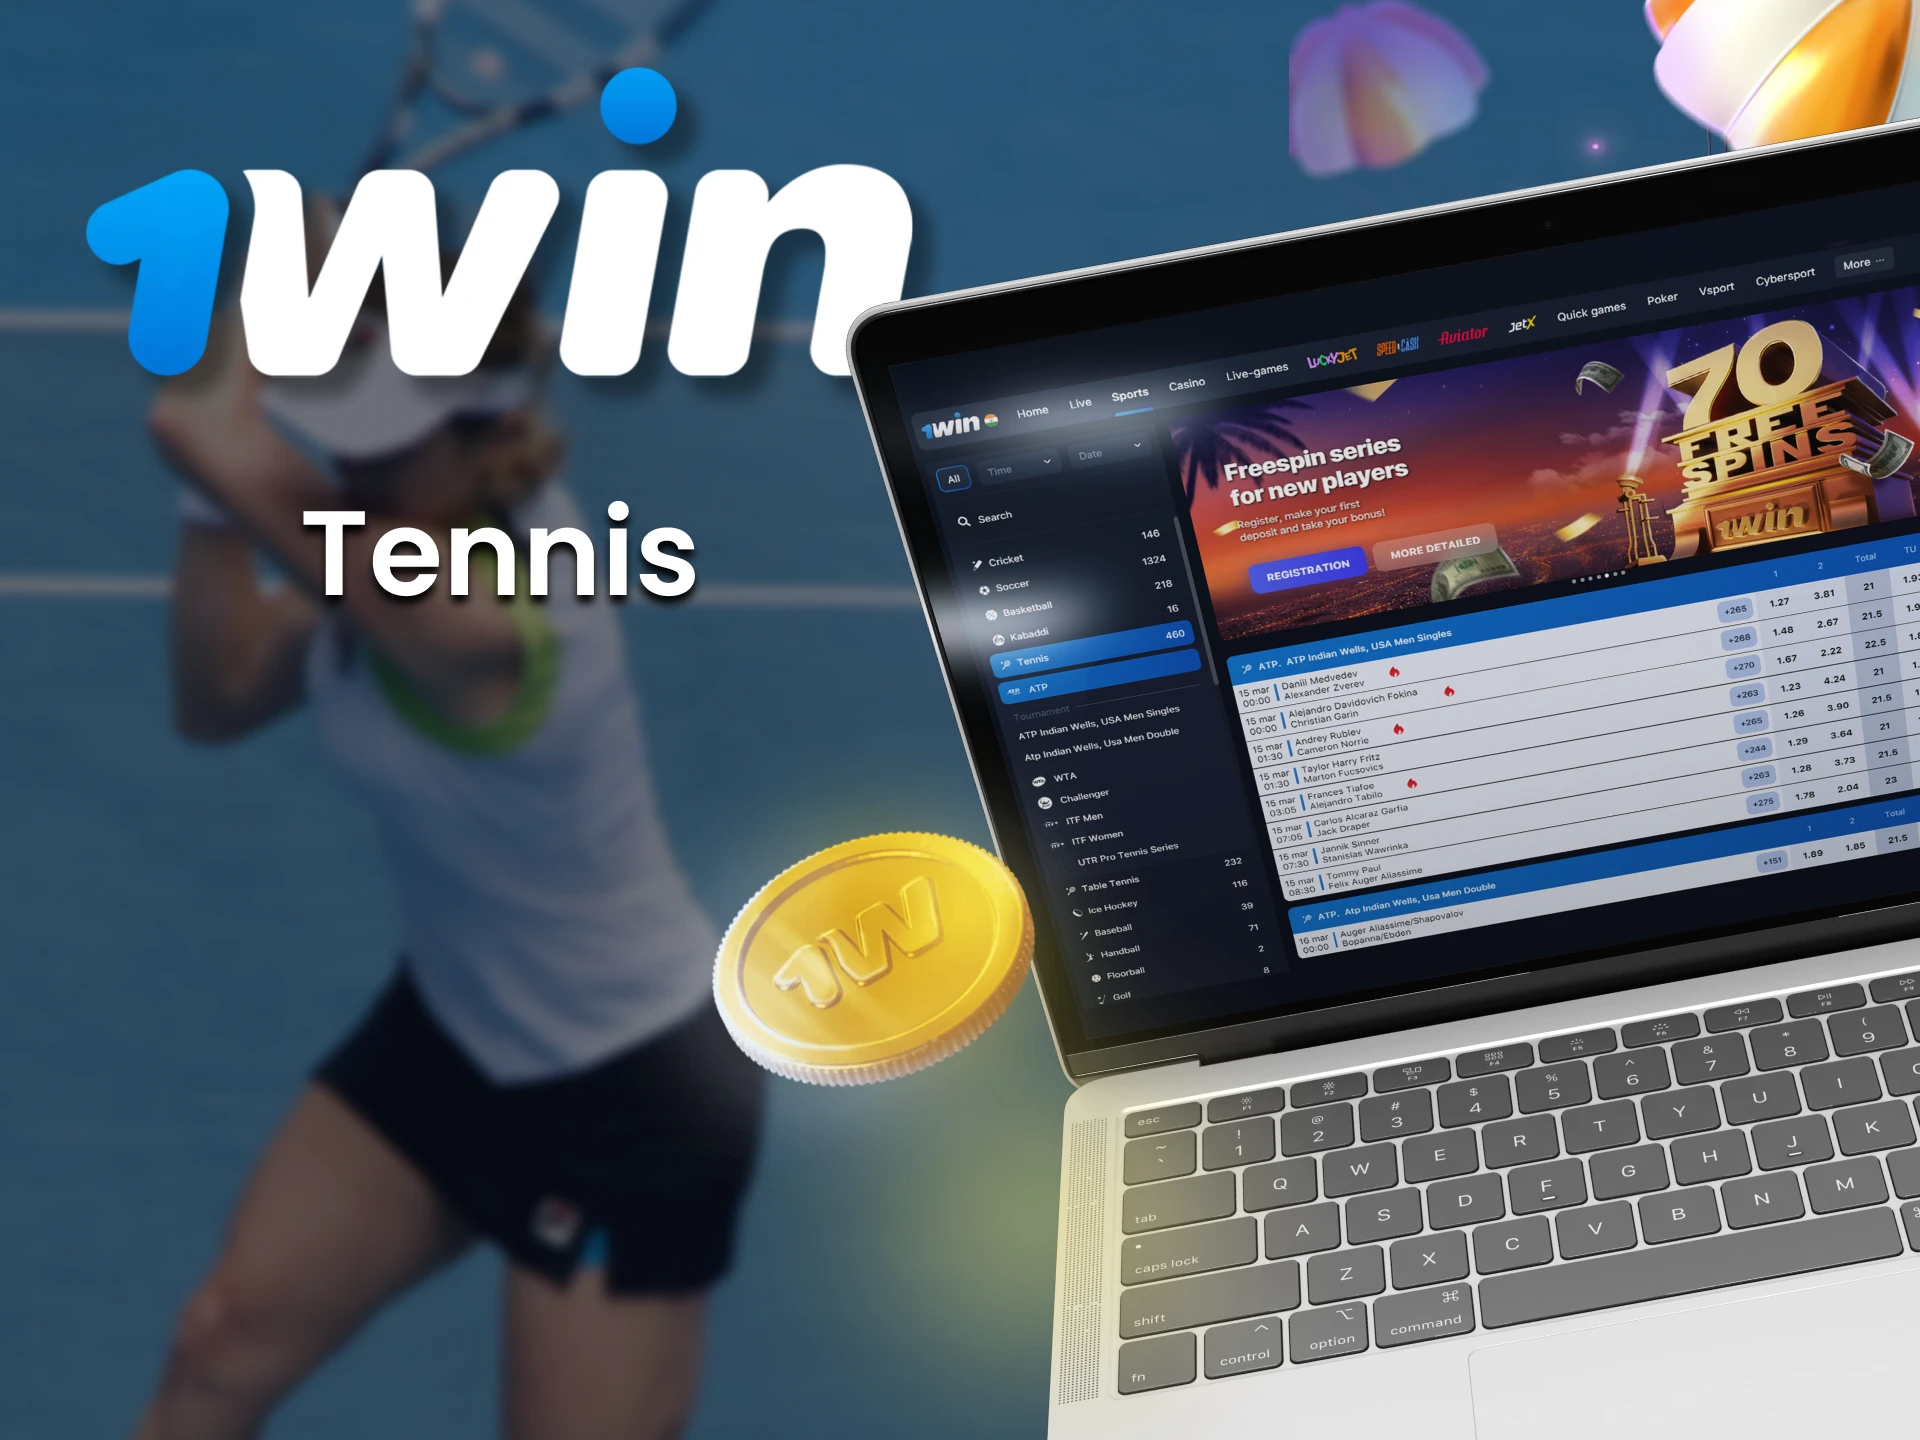 At 1win, place your bet on a tennis match.